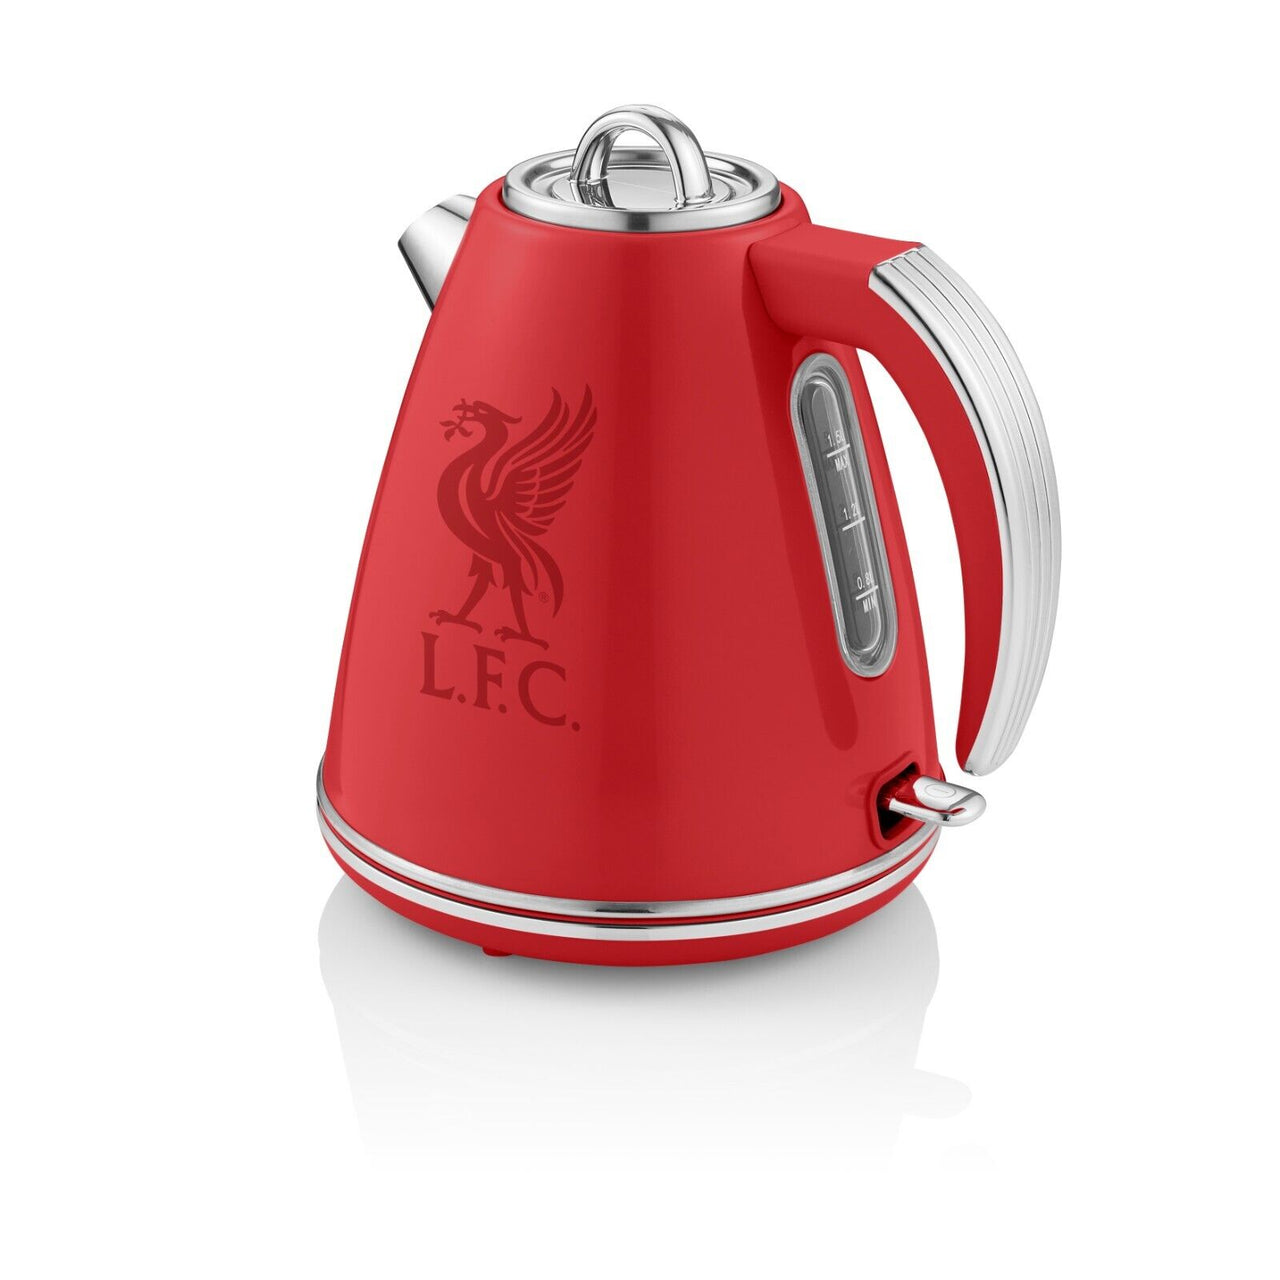 Swan Official Liverpool FC Red Jug Kettle 4 Slice Toaster & Microwave Retro Set